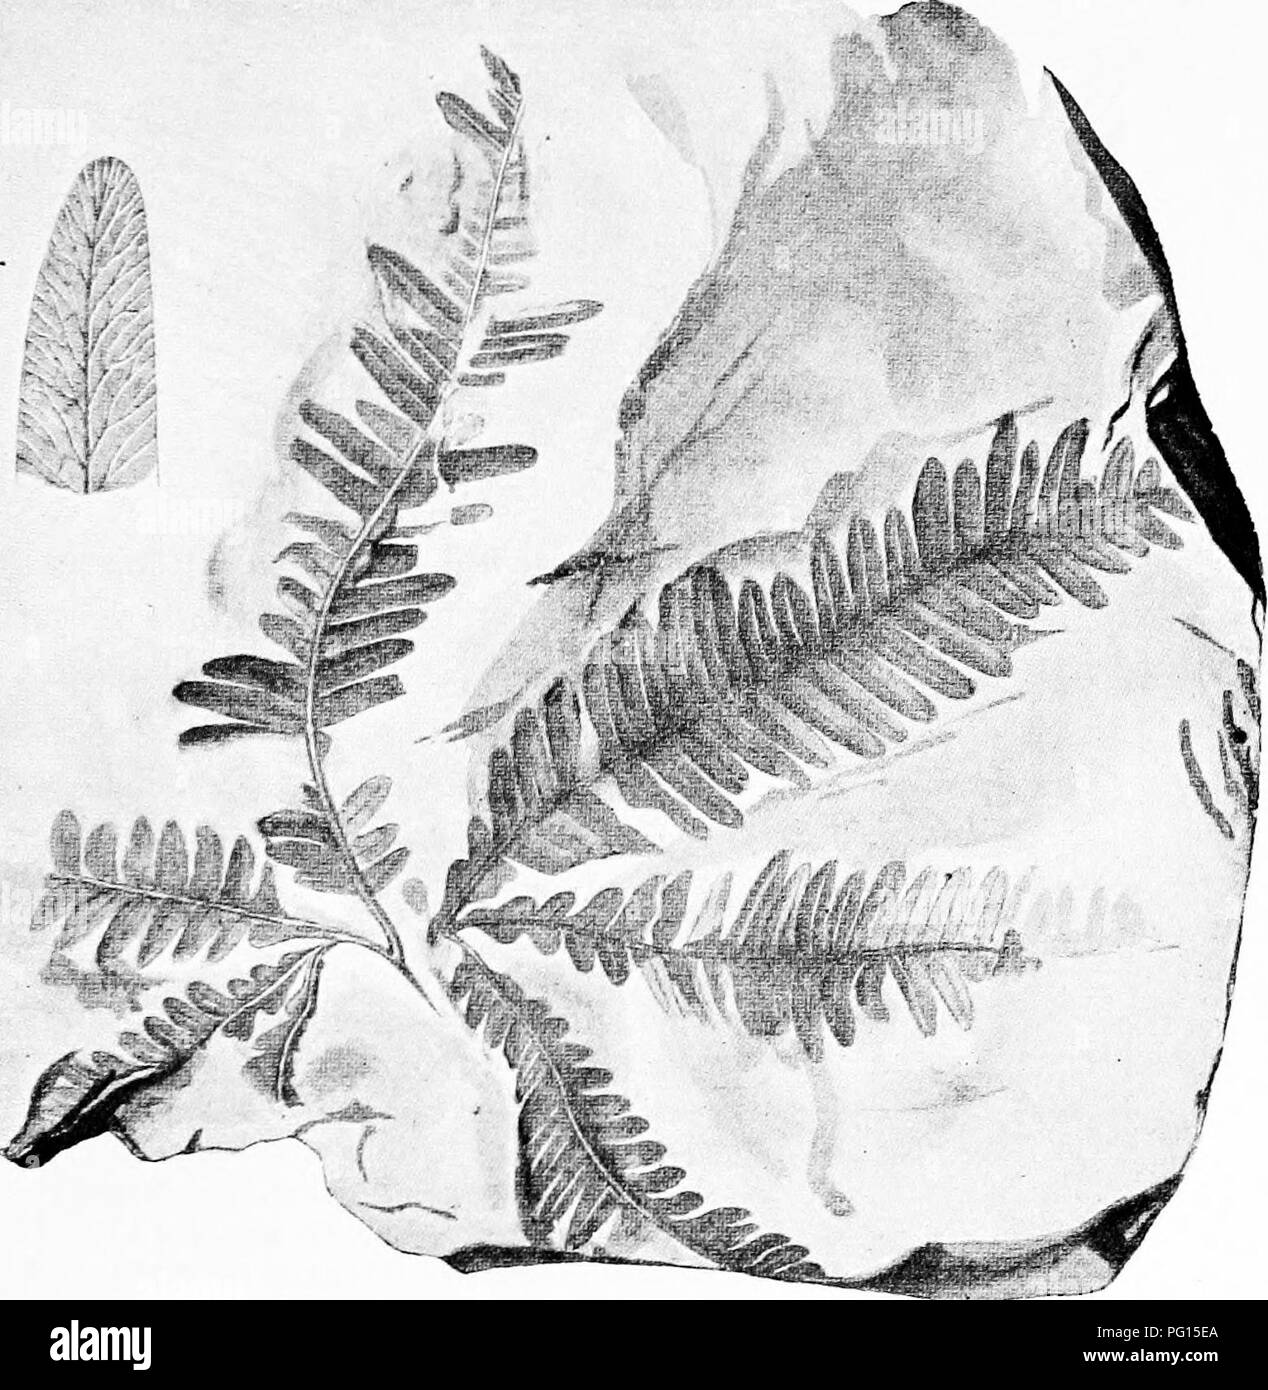 . Fossil plants : for students of botany and geology . Paleobotany. XXI] MATONINEAE 357 Matonia pectinata. Zeiller^ first established the practical identity of the sori and sporangia of Laccopteris and Matonia. The Rhaetic species, such as L. Muensteri, L. elegans, and L. Goepperti, agree very closely with L. polypodioides and need not be described in detail.. Fio. 264. Laccopteris elegans (Presl). (From a specimen in the British Museum ; from the Lower Keuper of Bayreuth, Germany. Nat. size ; part of pinnule x 3.) The Rhaetic species Laccopteris elegans, represented in fig. 264, illustrates t Stock Photo